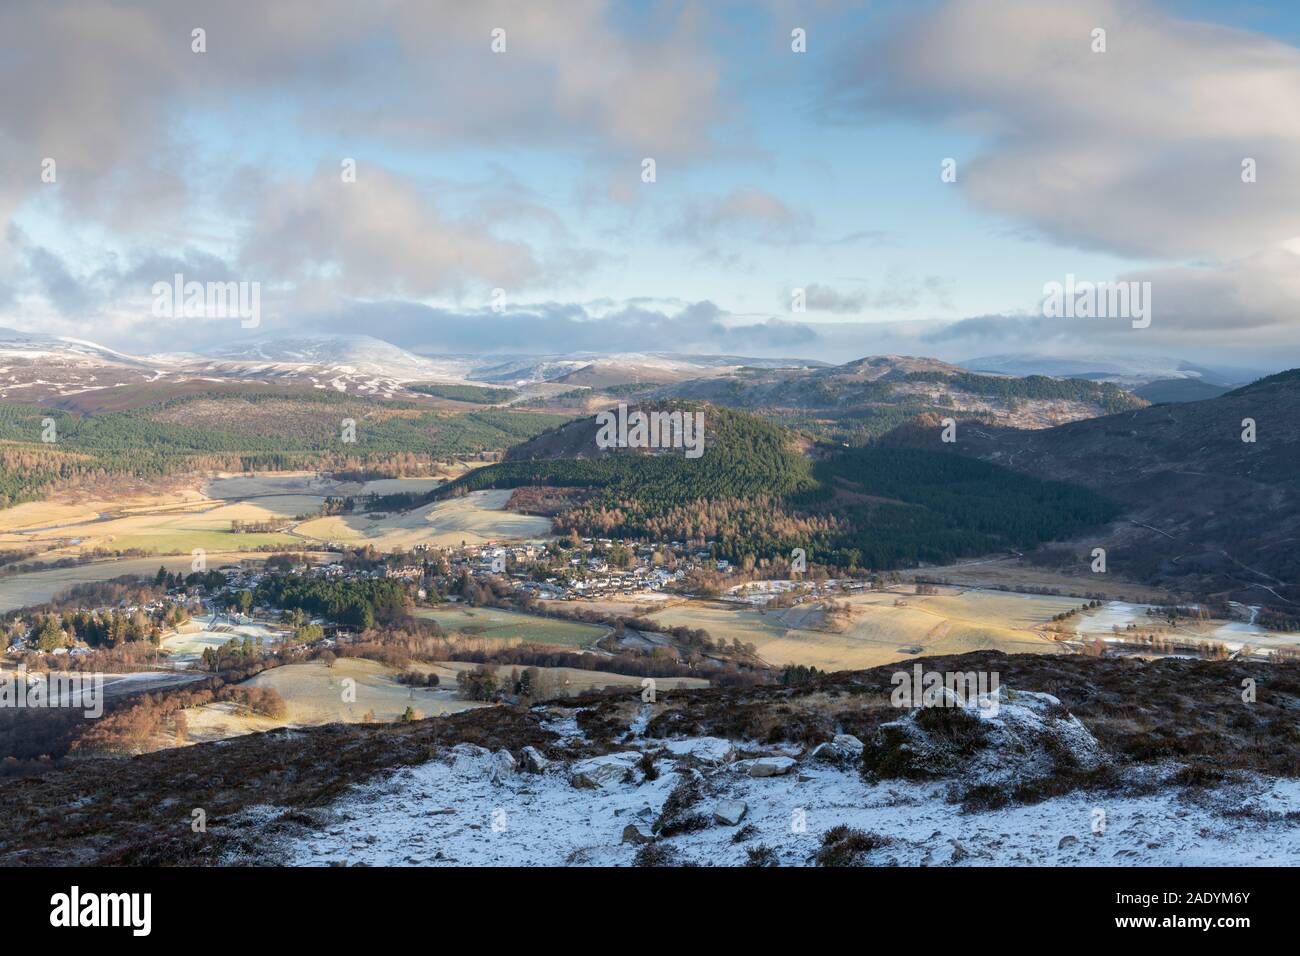 A View of Braemar from Morrone on a Frosty Winter Morning Showing the Village Surrounded by Mountains in the Cairngorms National Park Stock Photo